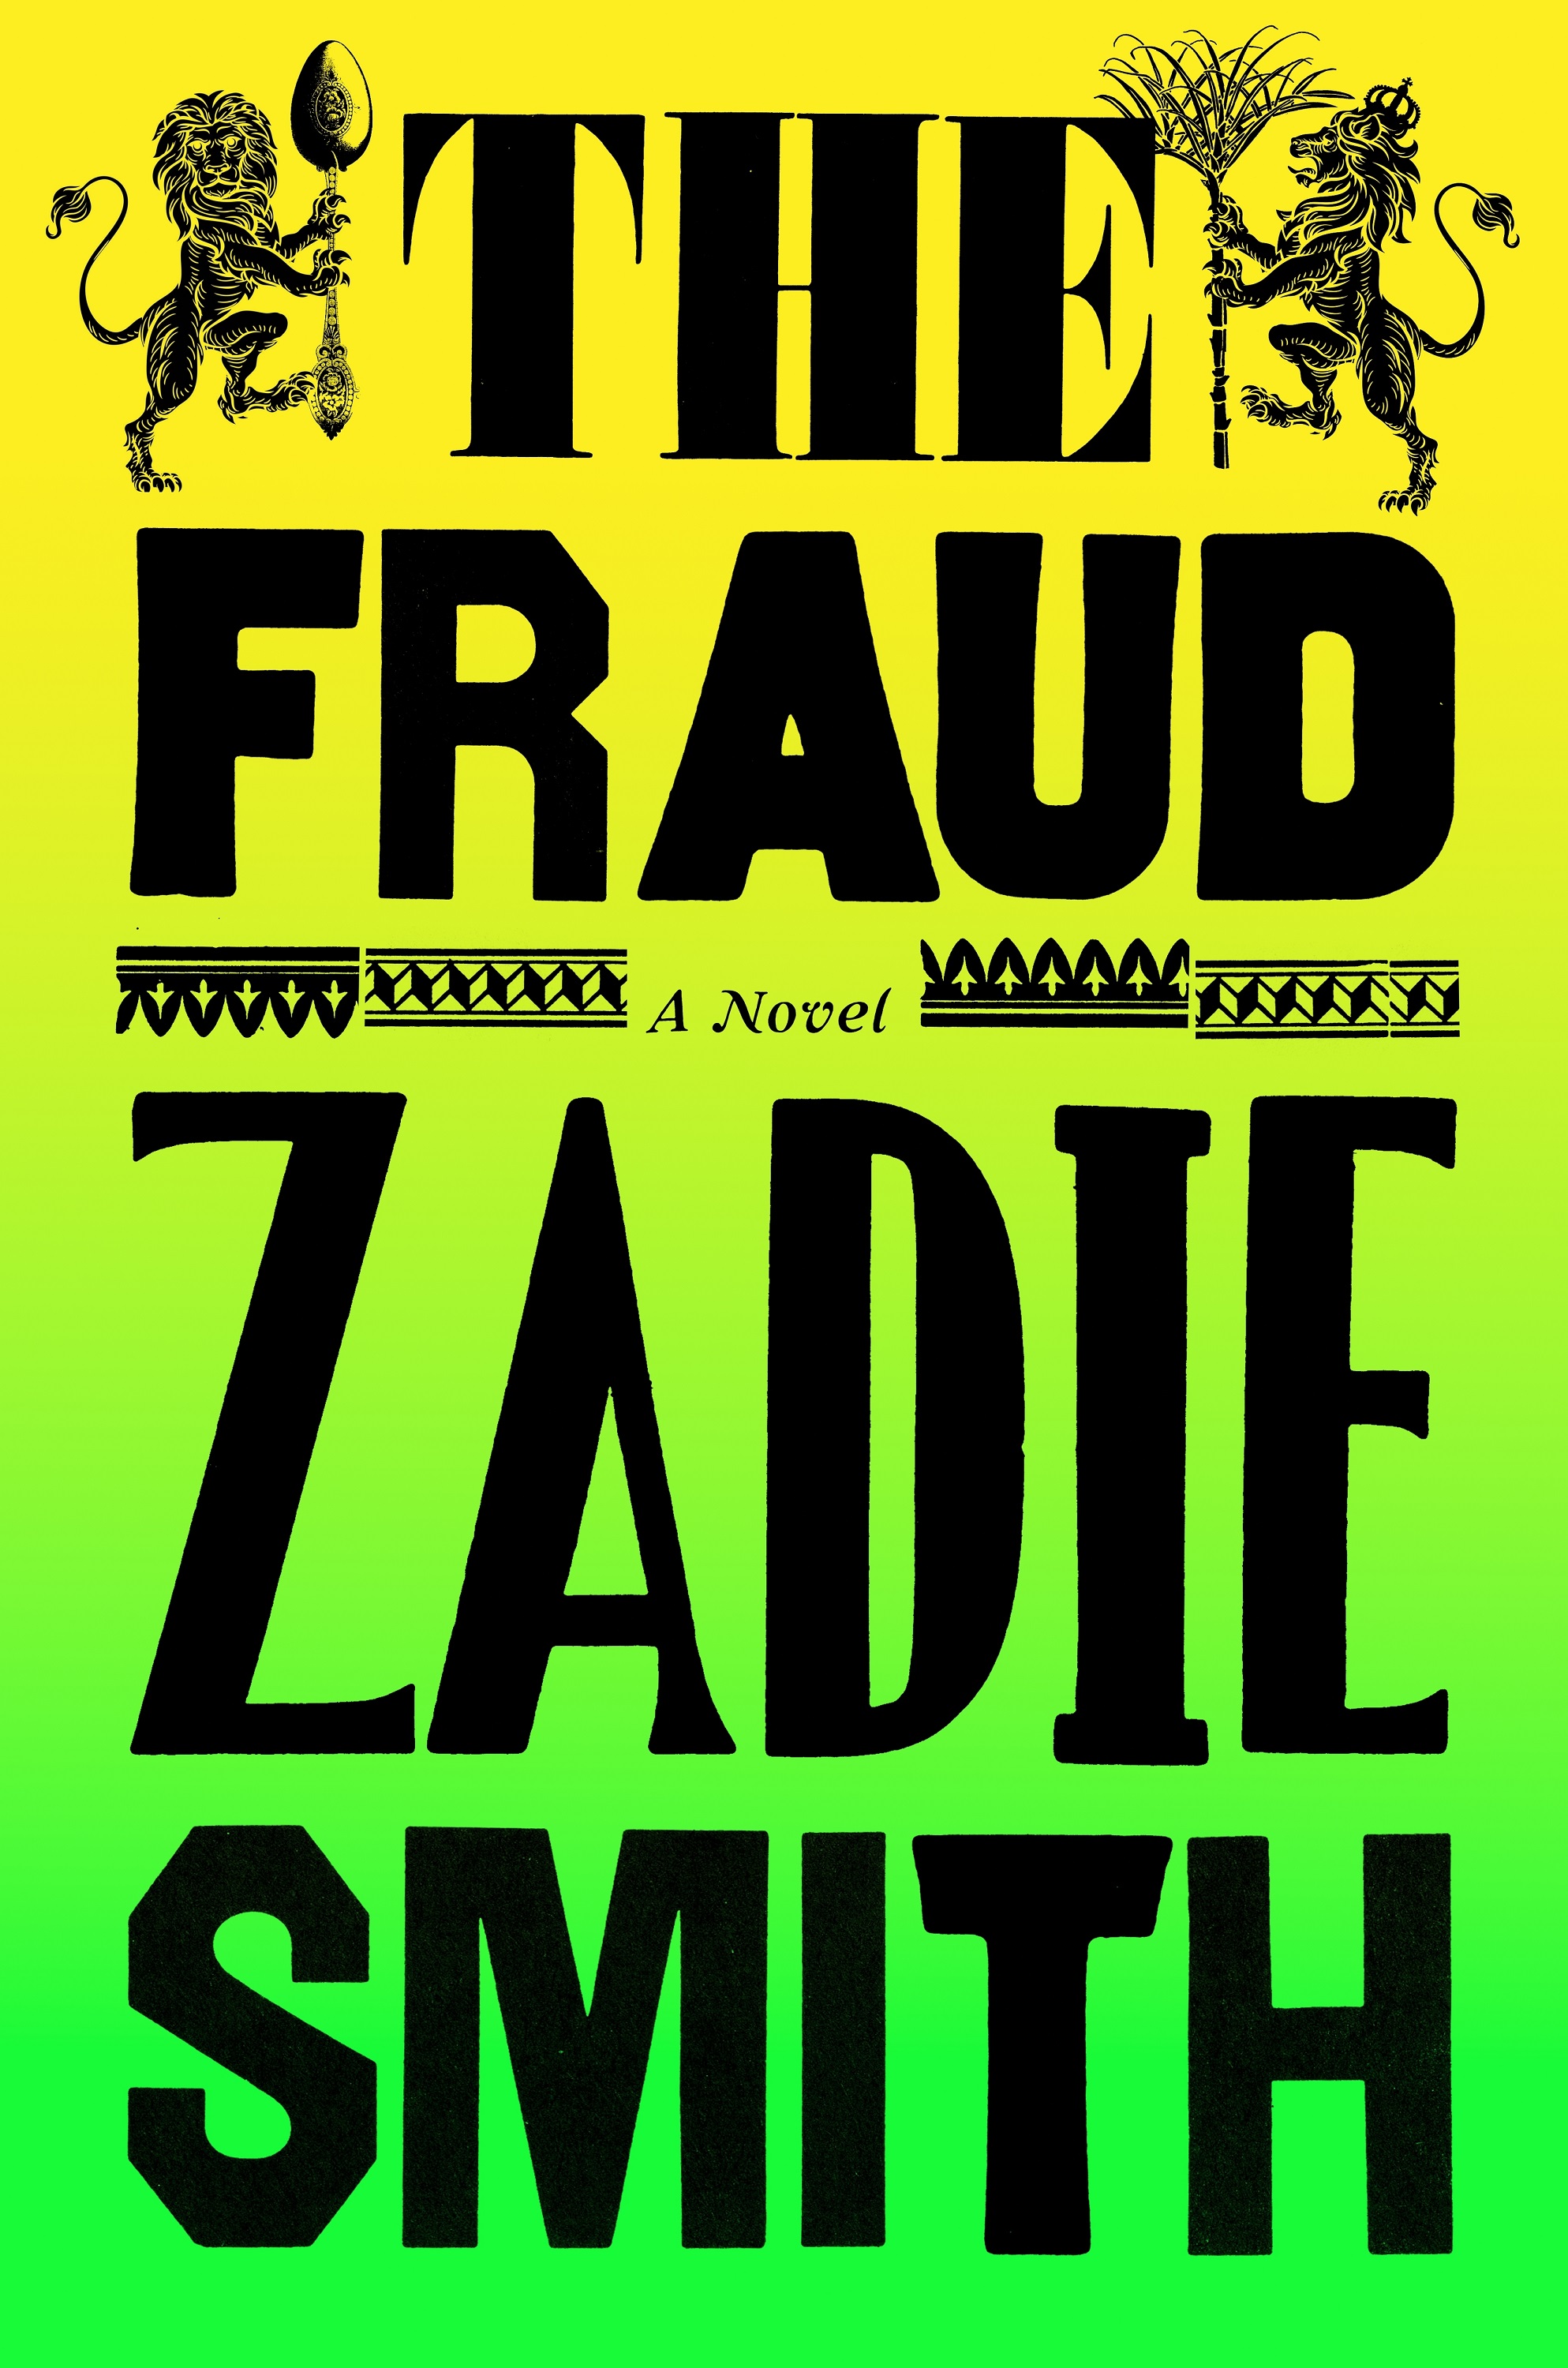 A book cover with large black text and black images of heraldic lions on a background that moves from yellow to lime green